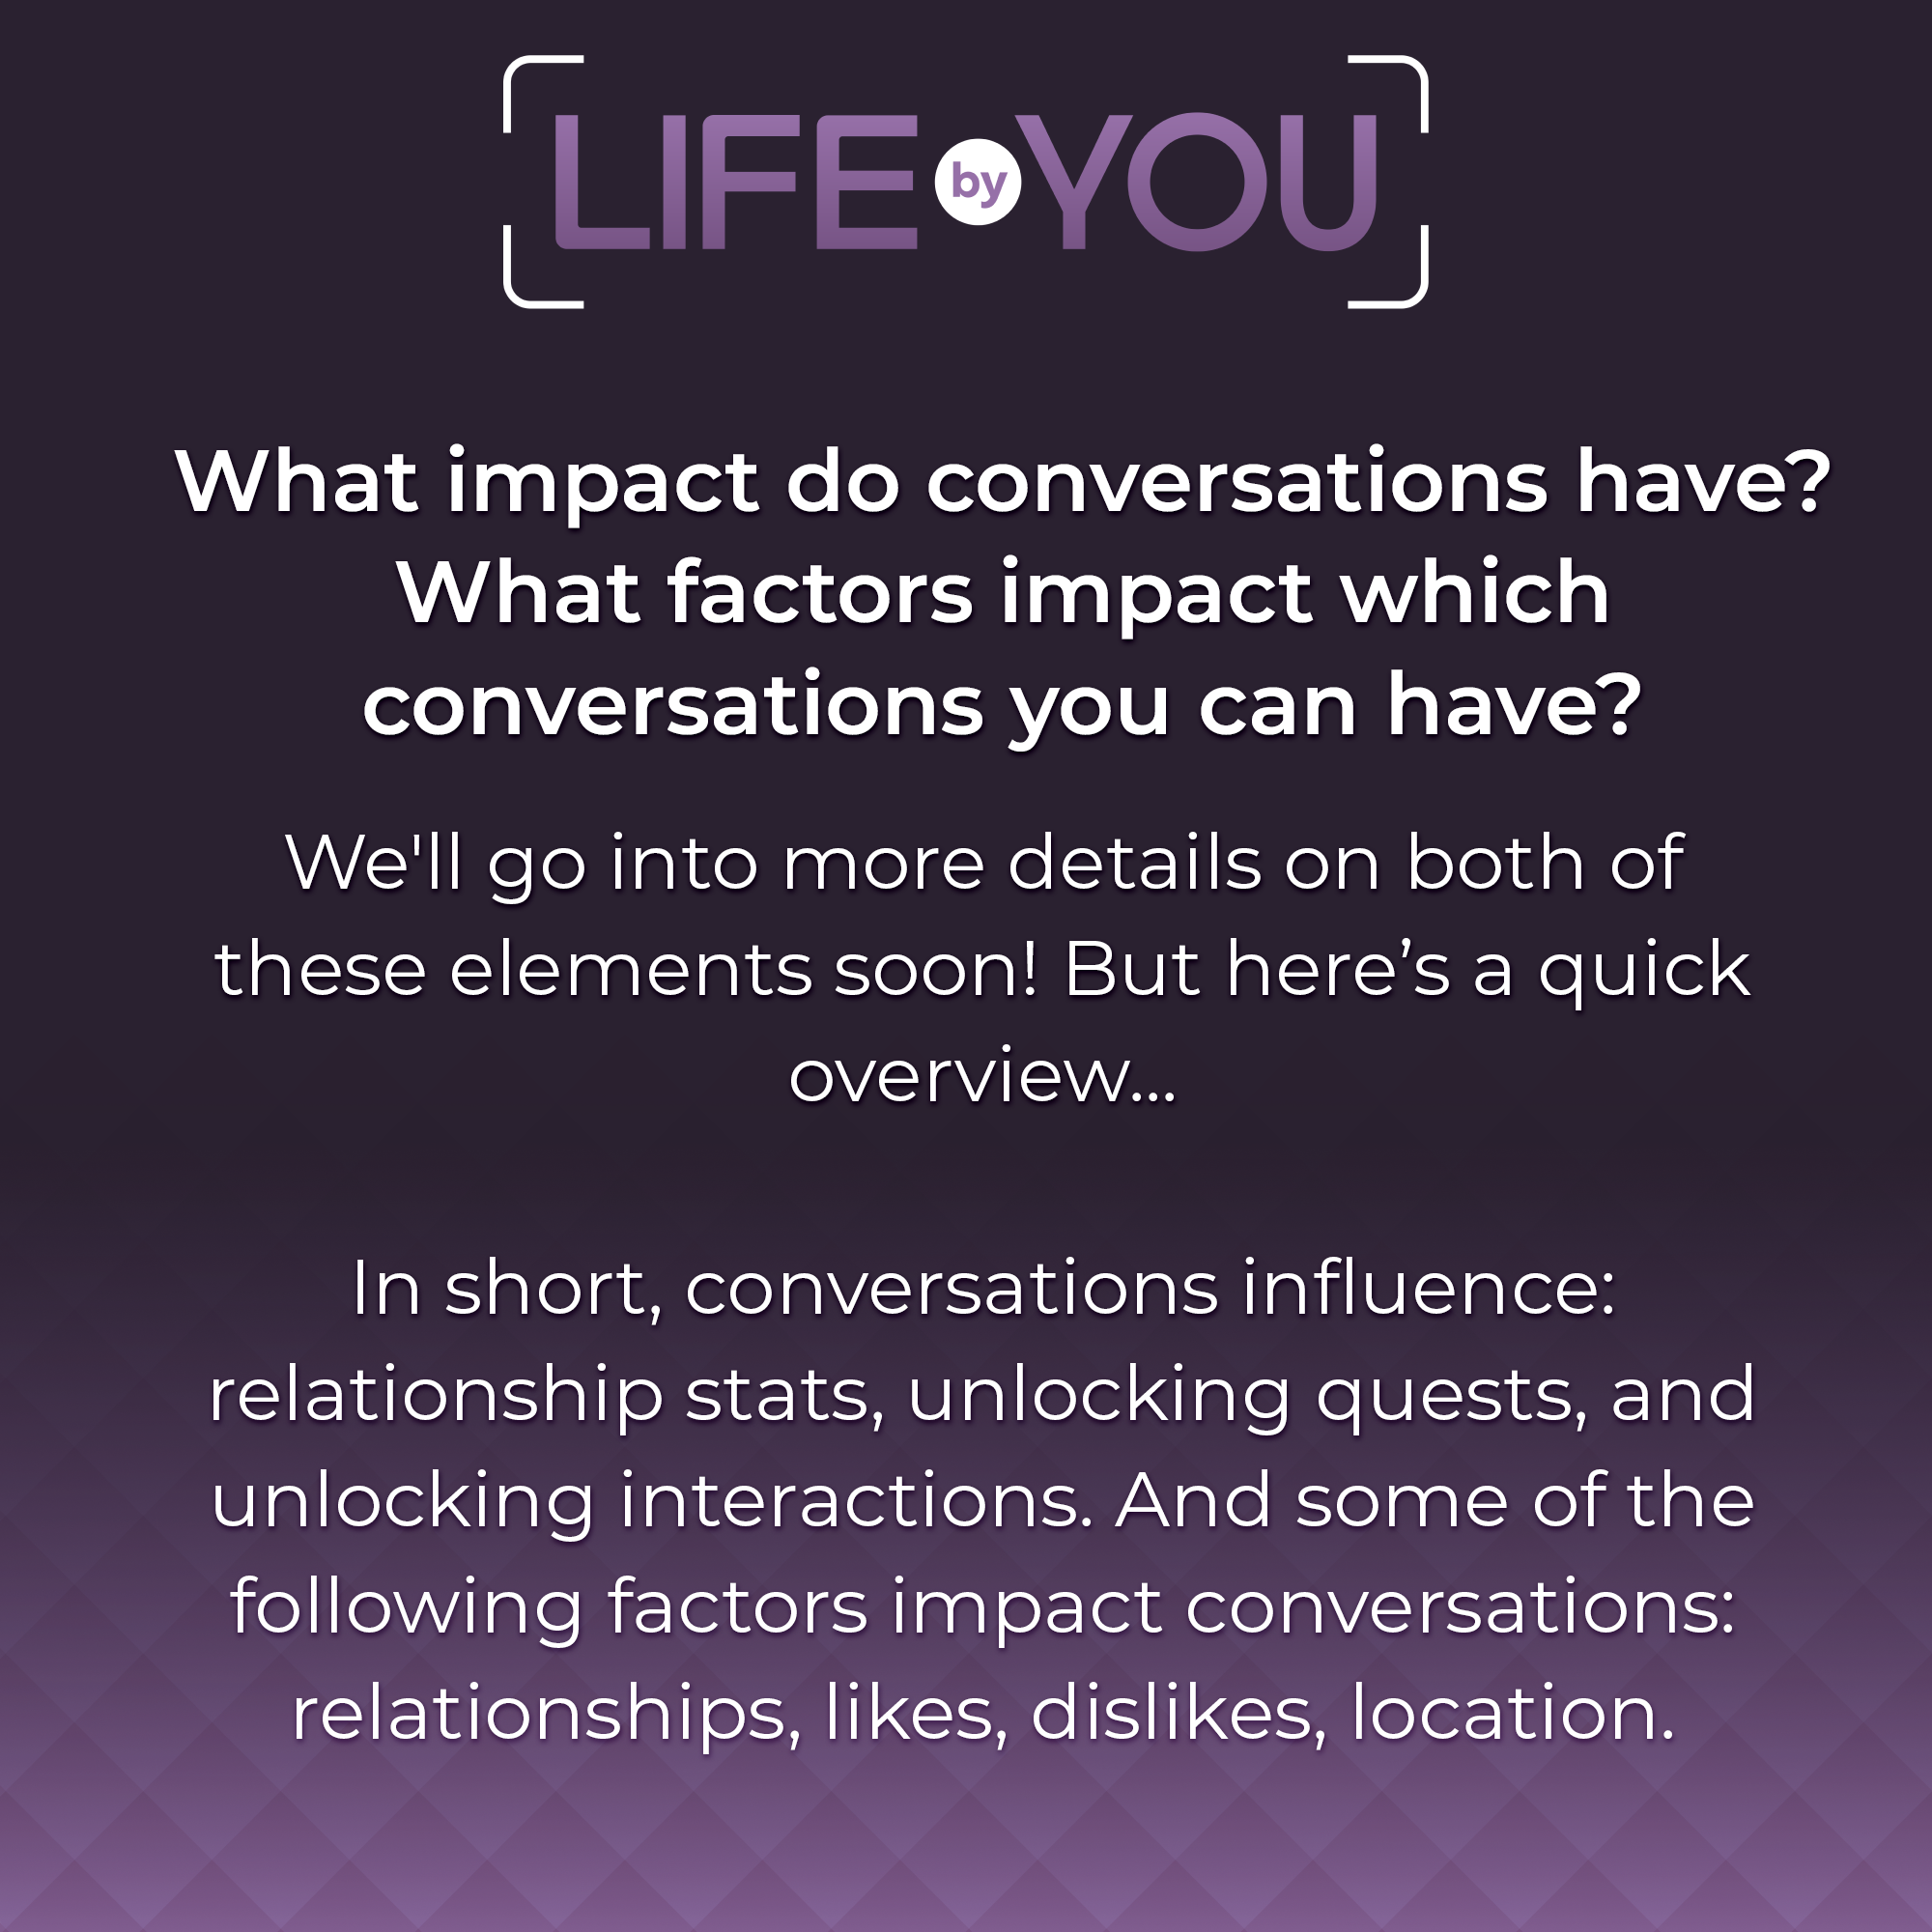 QnA What impact do conversations have? What impacts conversations?